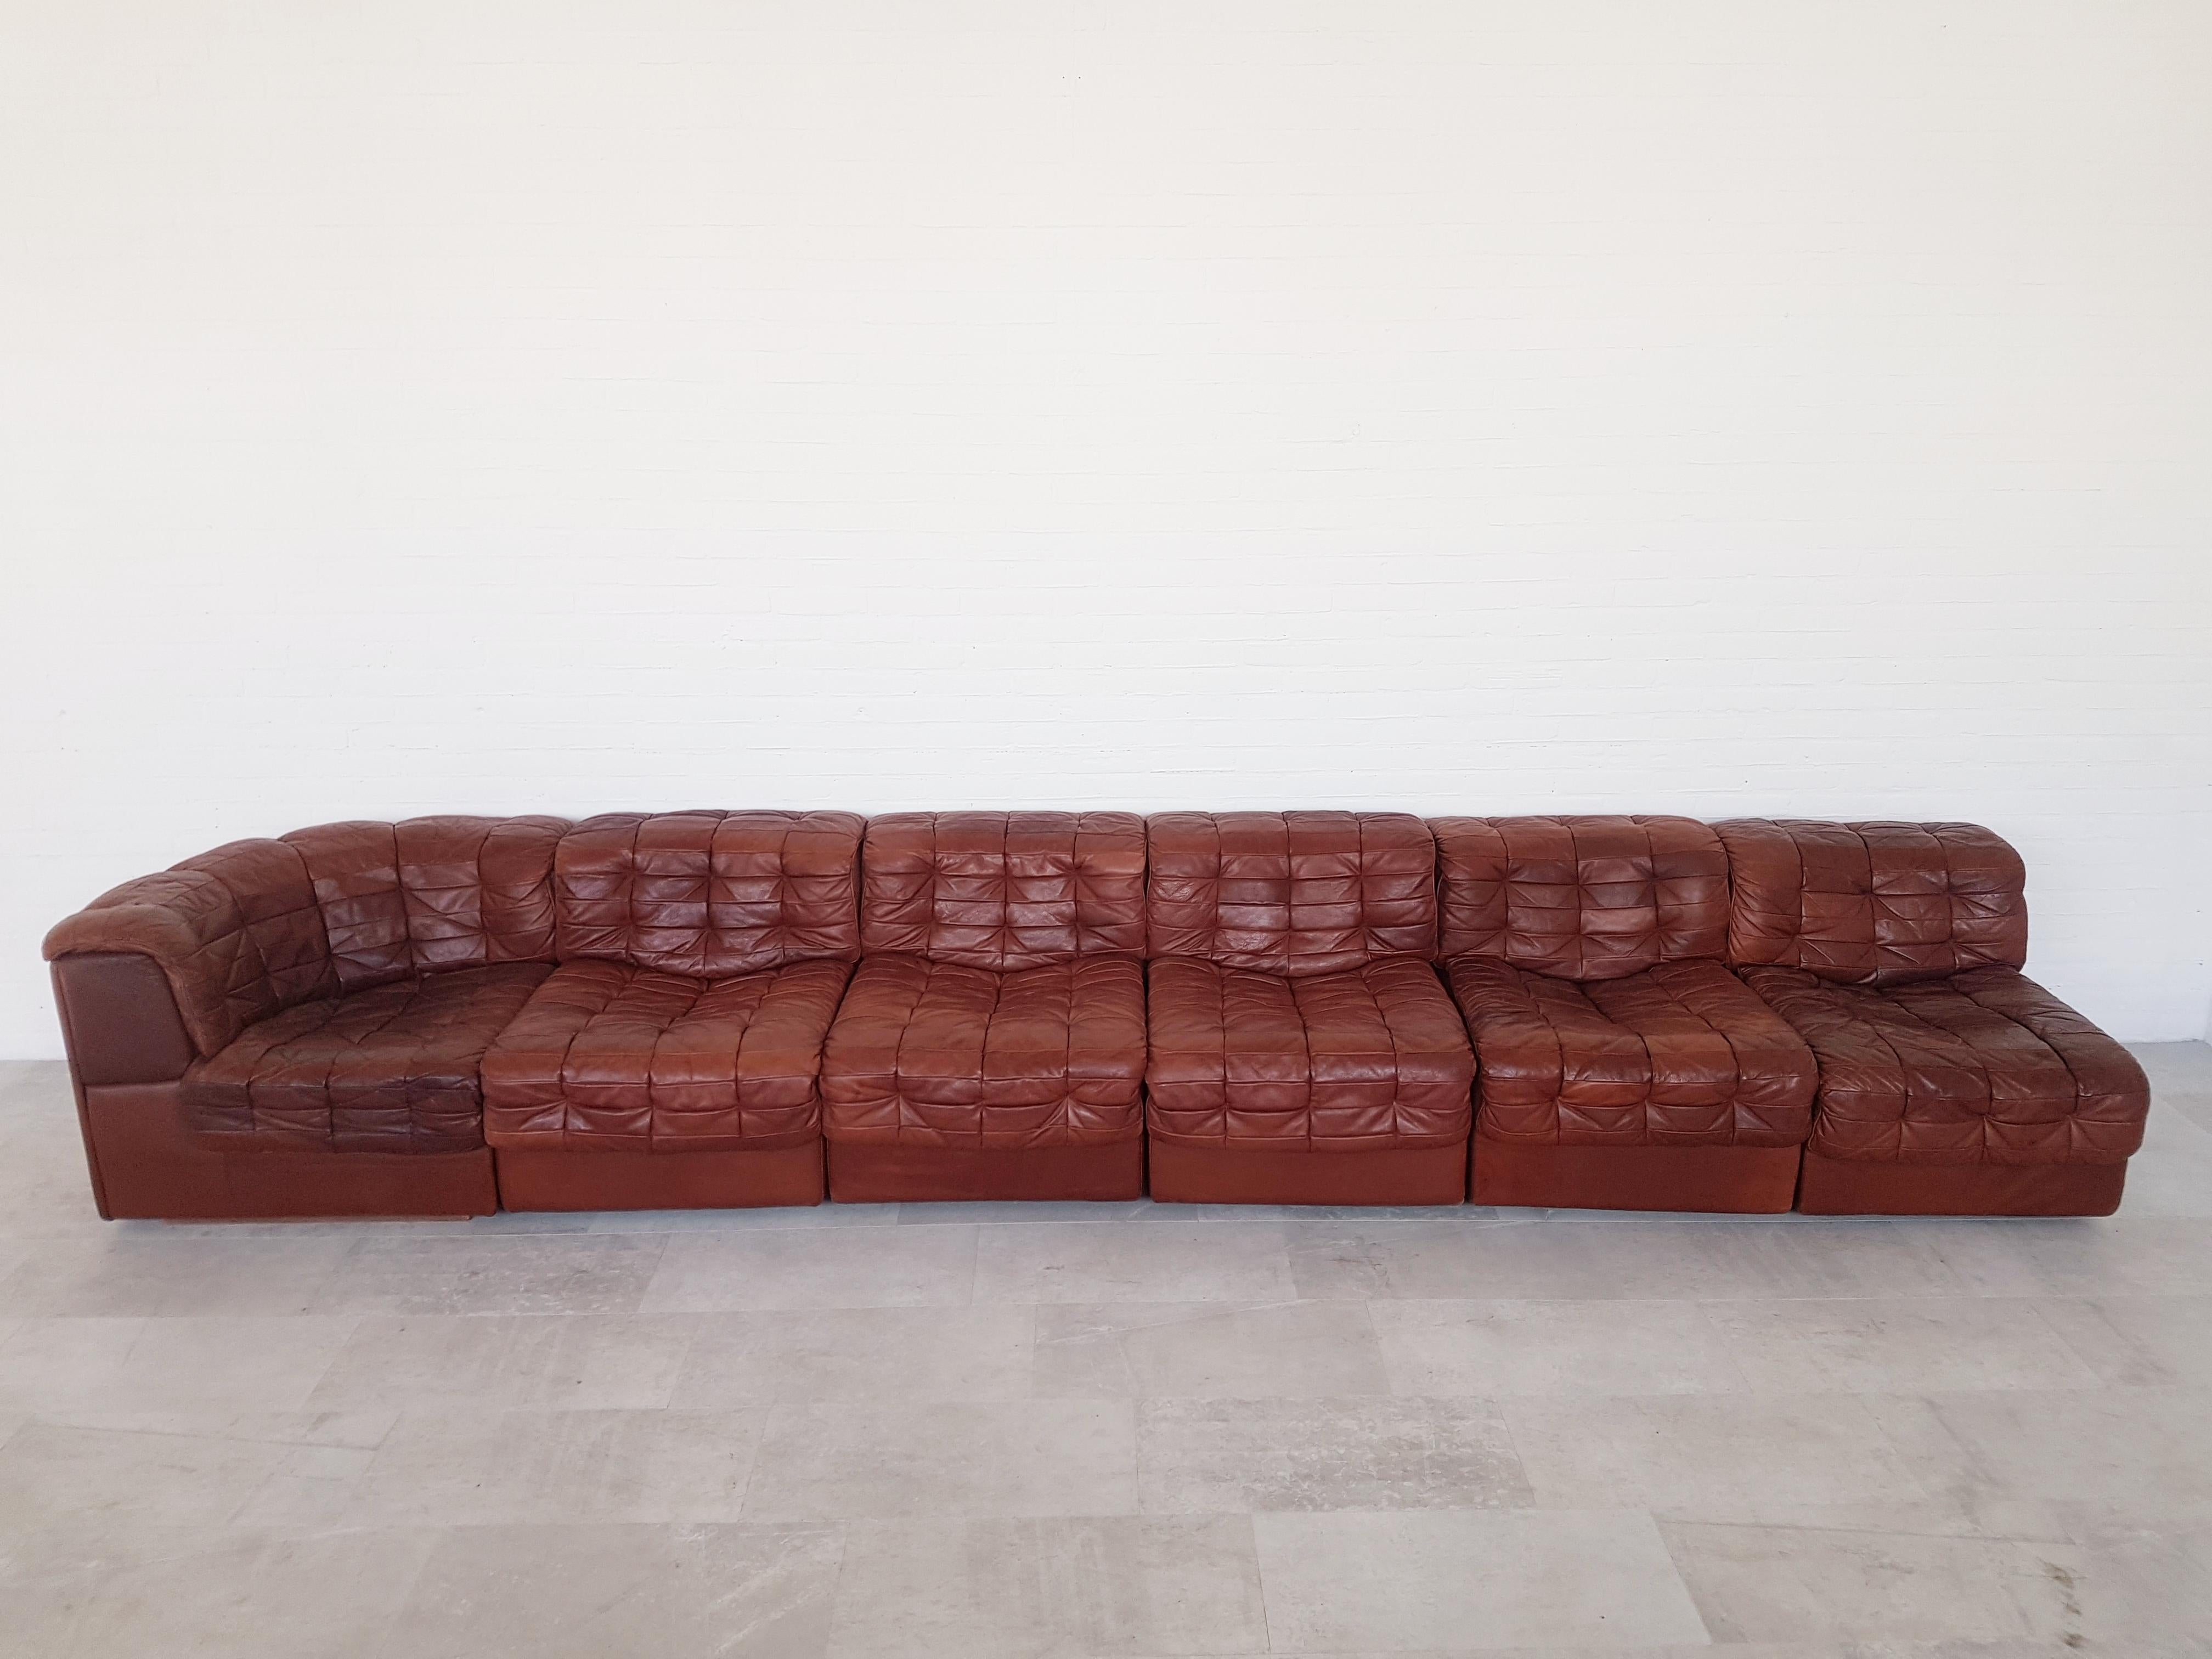 Mid-Century Modern Vintage Sectional Sofa DS 11 by De Sede, Switzerland